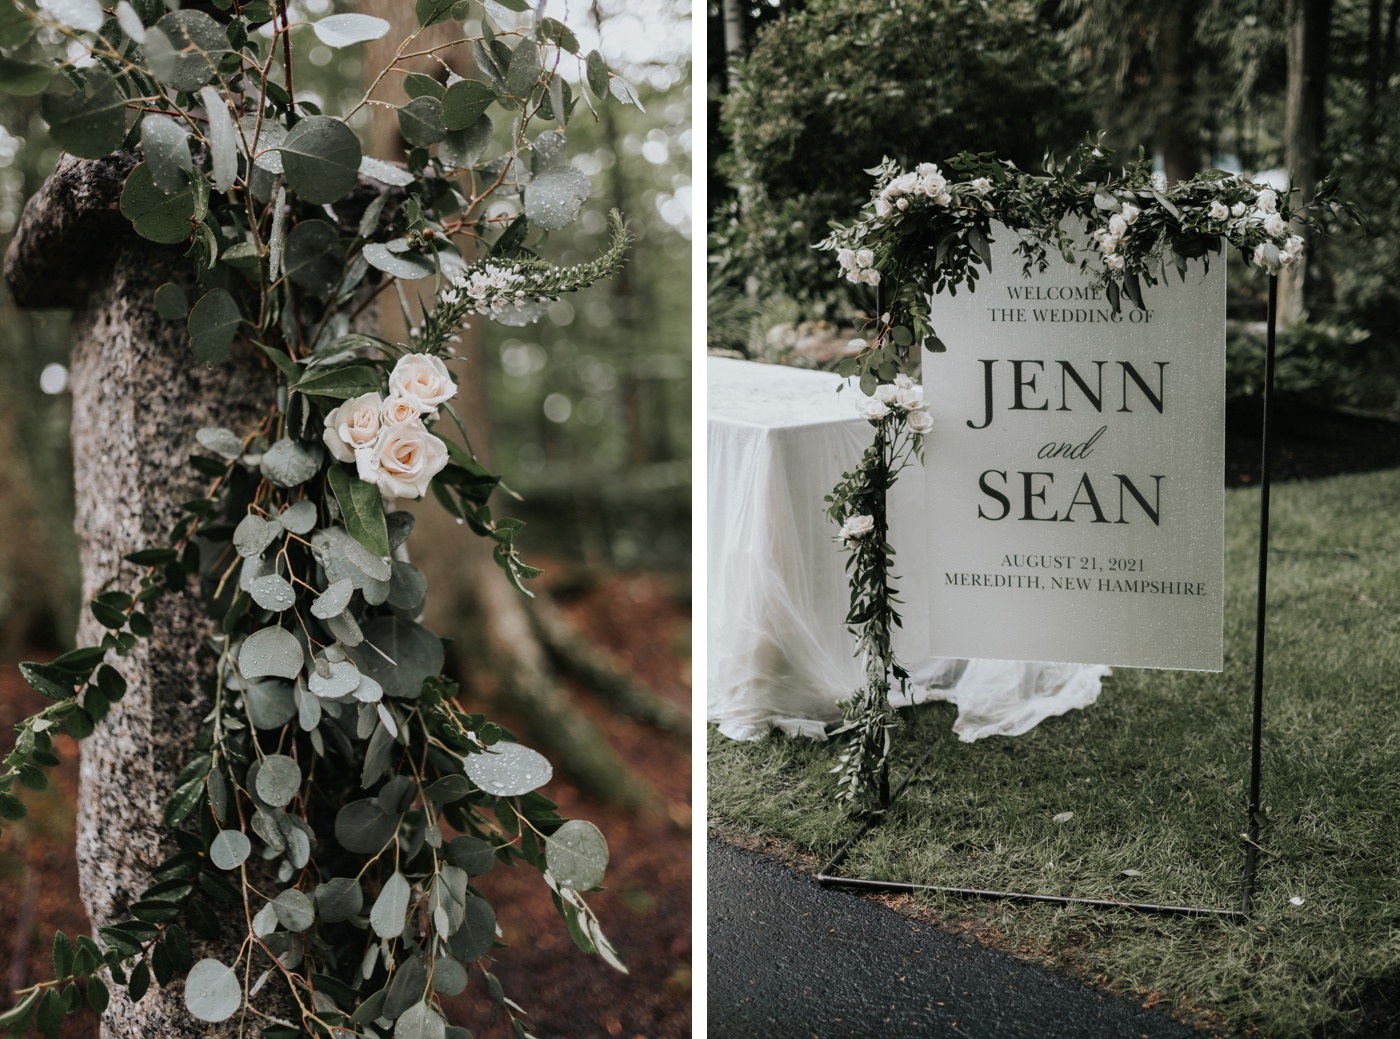 Events by Sorrell - New England Wedding Planning & Design